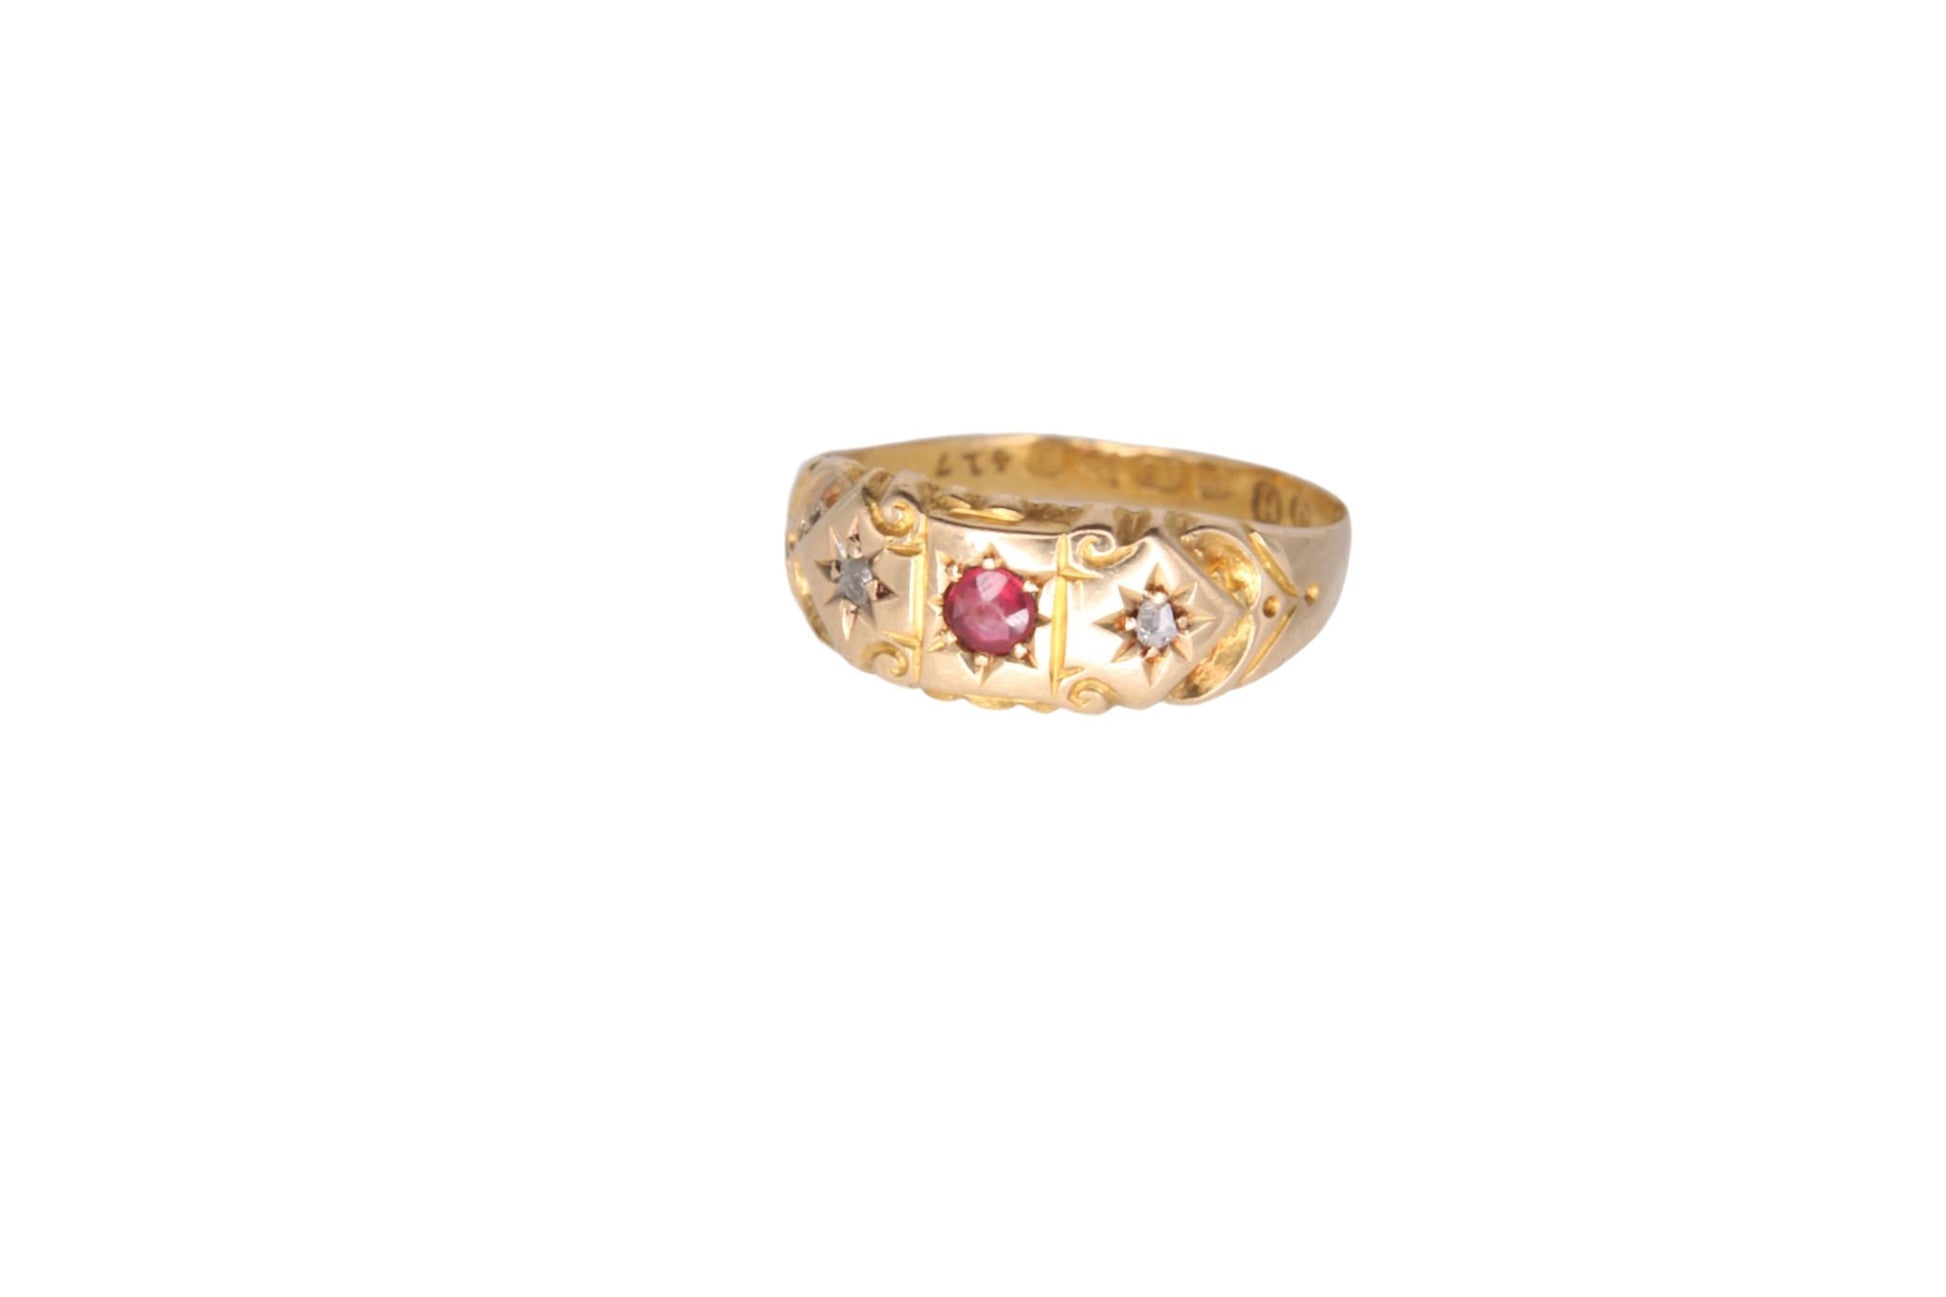 antique-18ct-gold-diamond-ruby-gypsy-ring